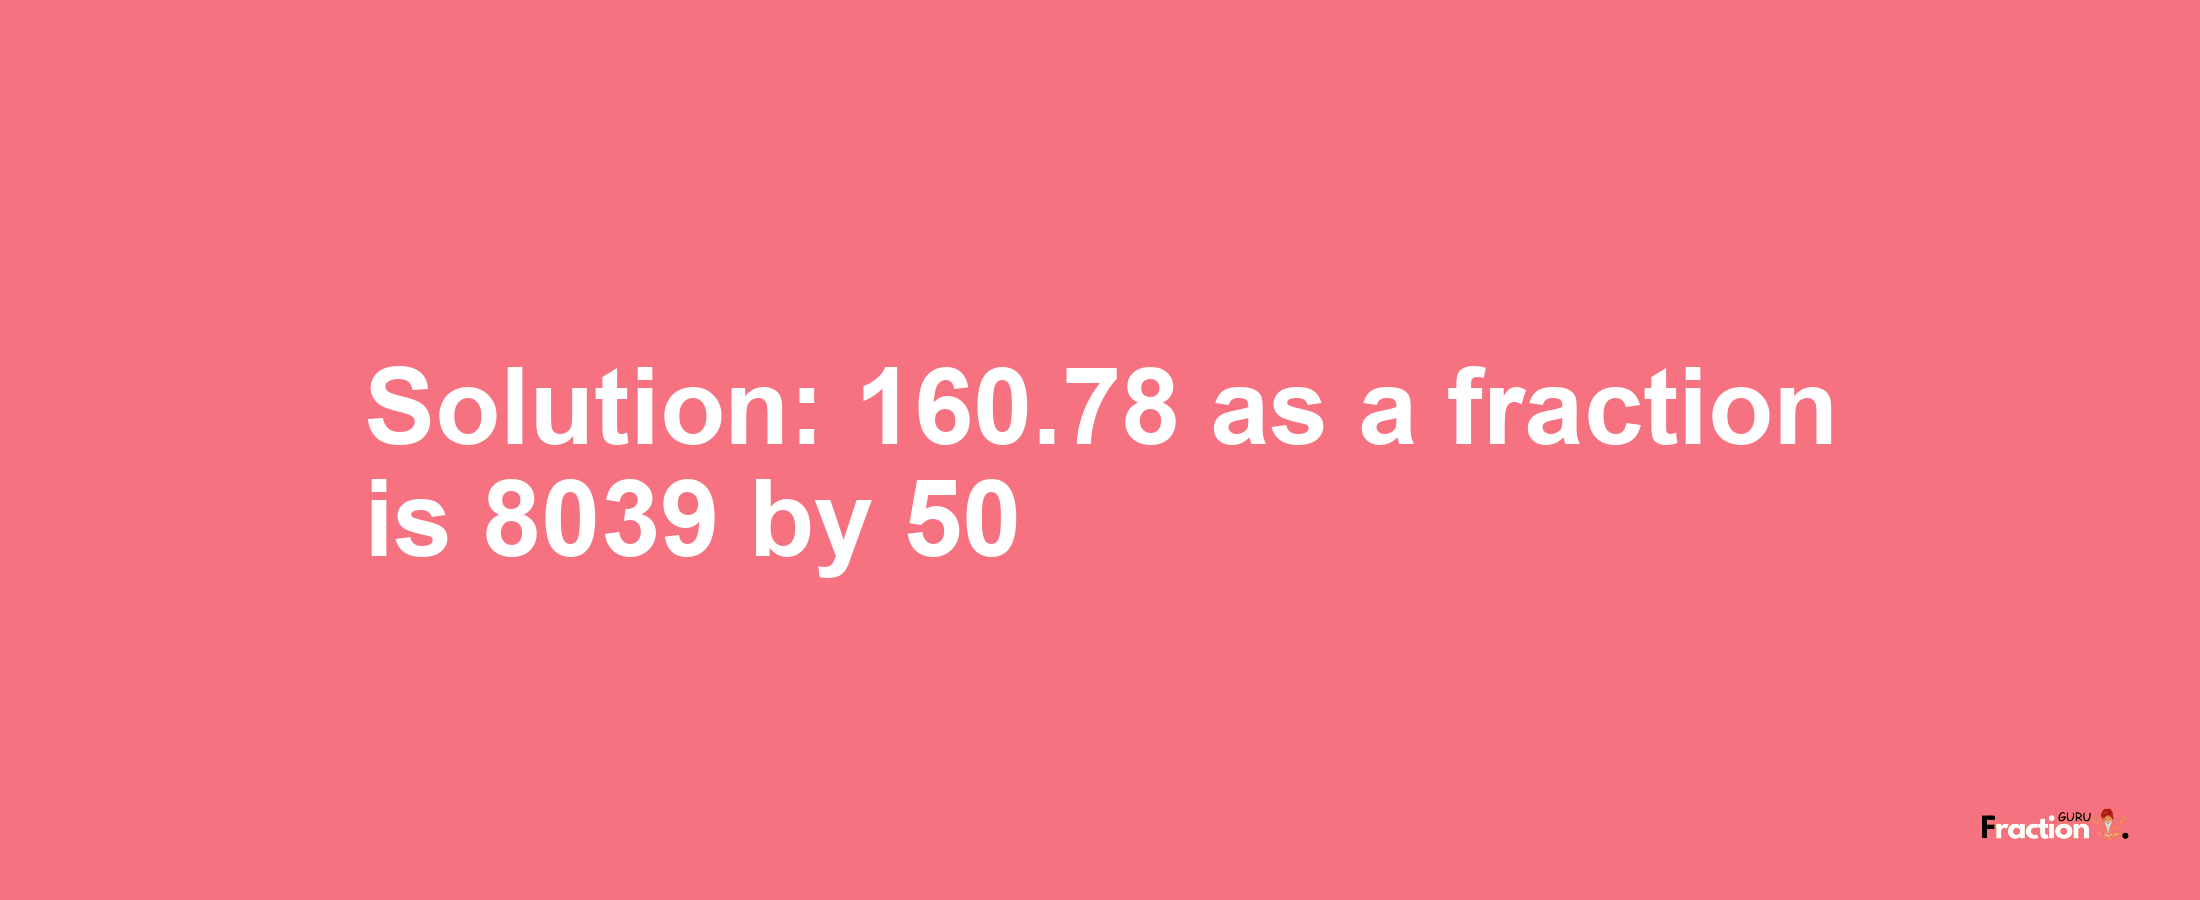 Solution:160.78 as a fraction is 8039/50